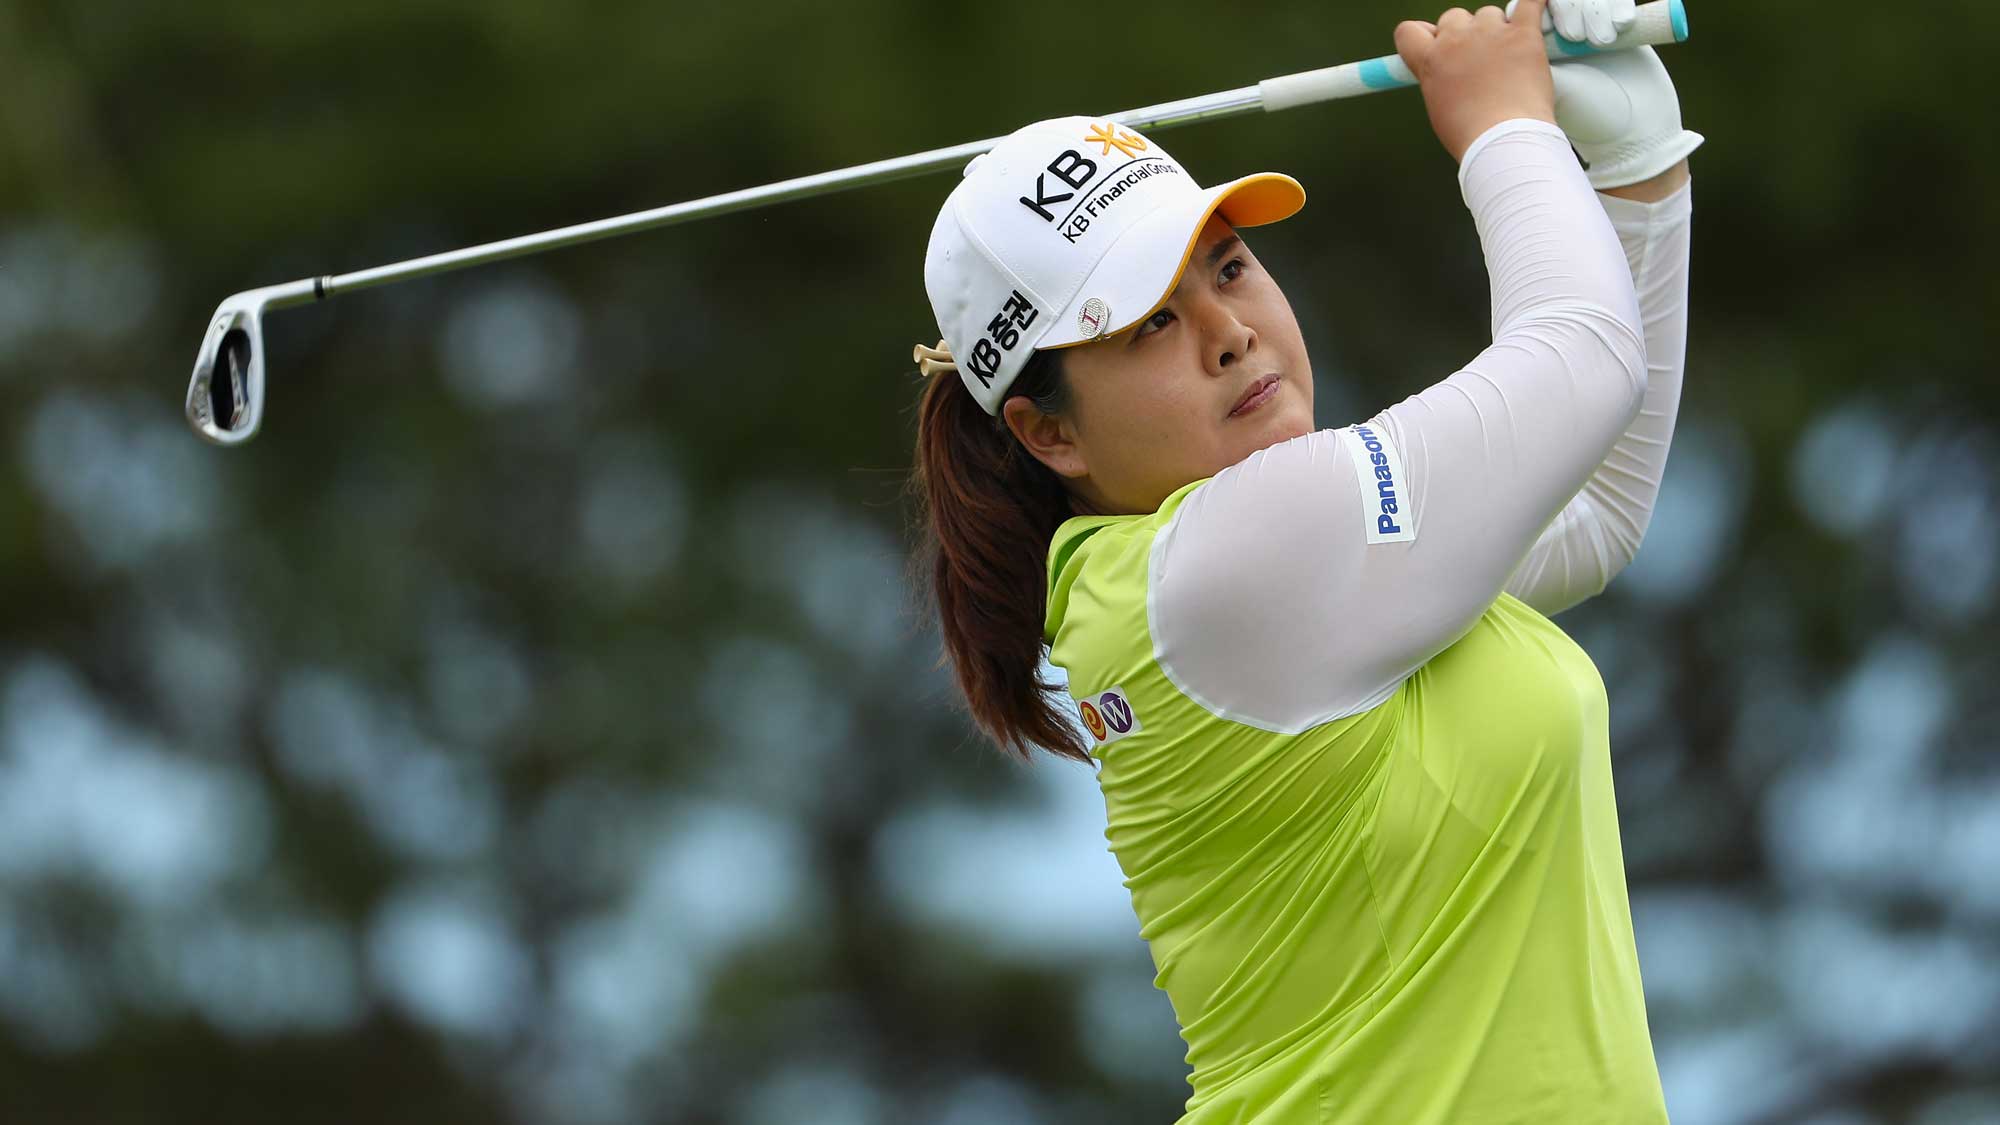 Inbee Park of the Republic of Korea plays a tee shot on the eighth hole during the third round of the LPGA LOTTE Championship Presented By Hershey